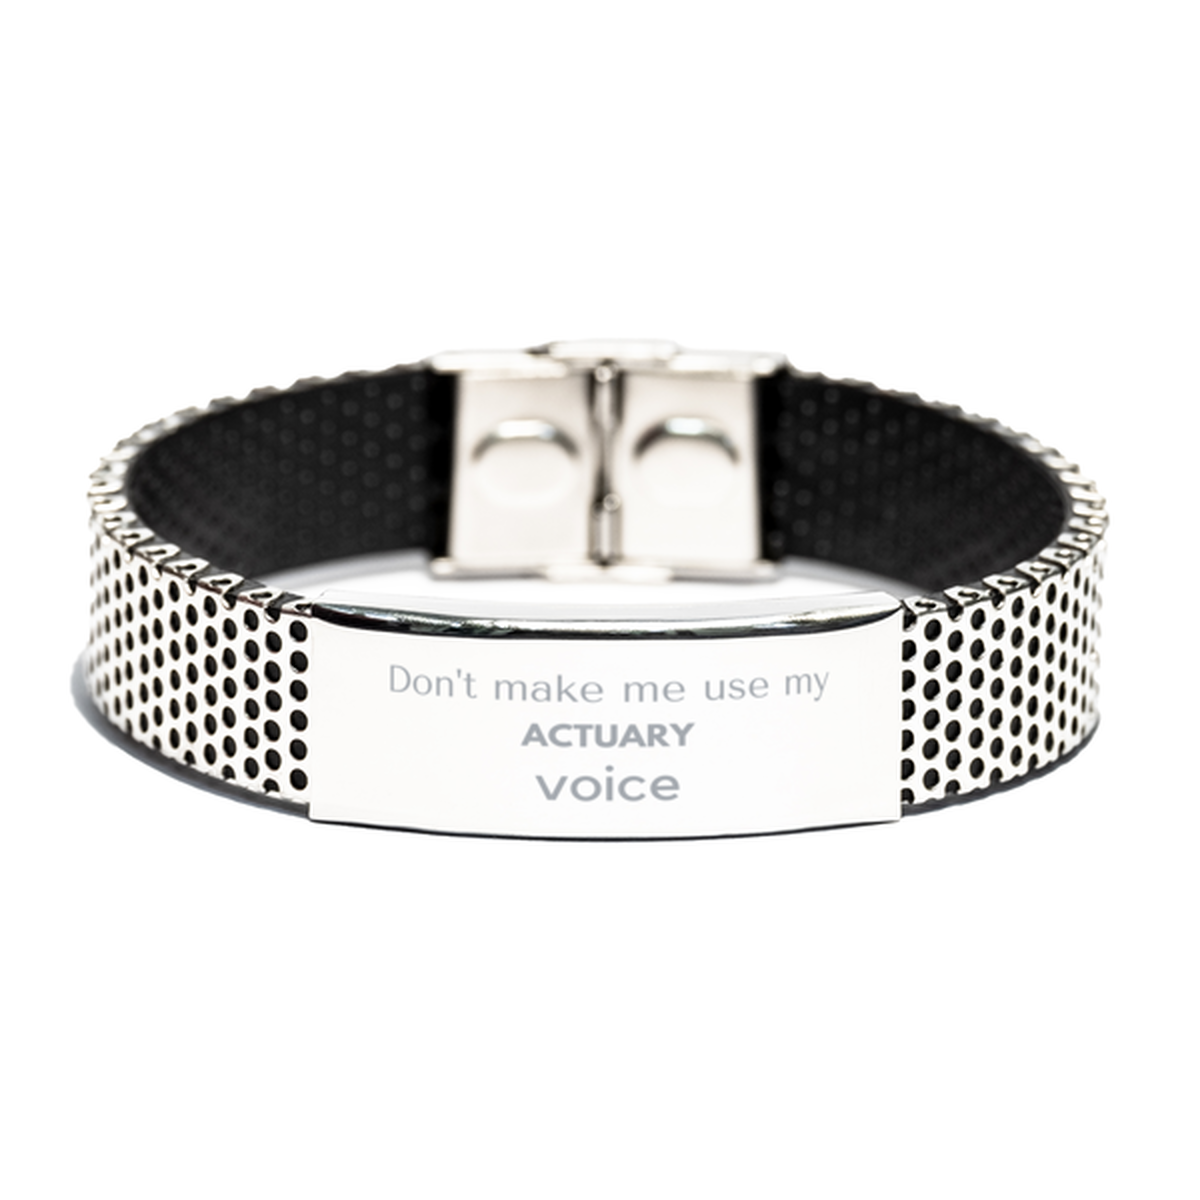 Don't make me use my Actuary voice, Sarcasm Actuary Gifts, Christmas Actuary Stainless Steel Bracelet Birthday Unique Gifts For Actuary Coworkers, Men, Women, Colleague, Friends